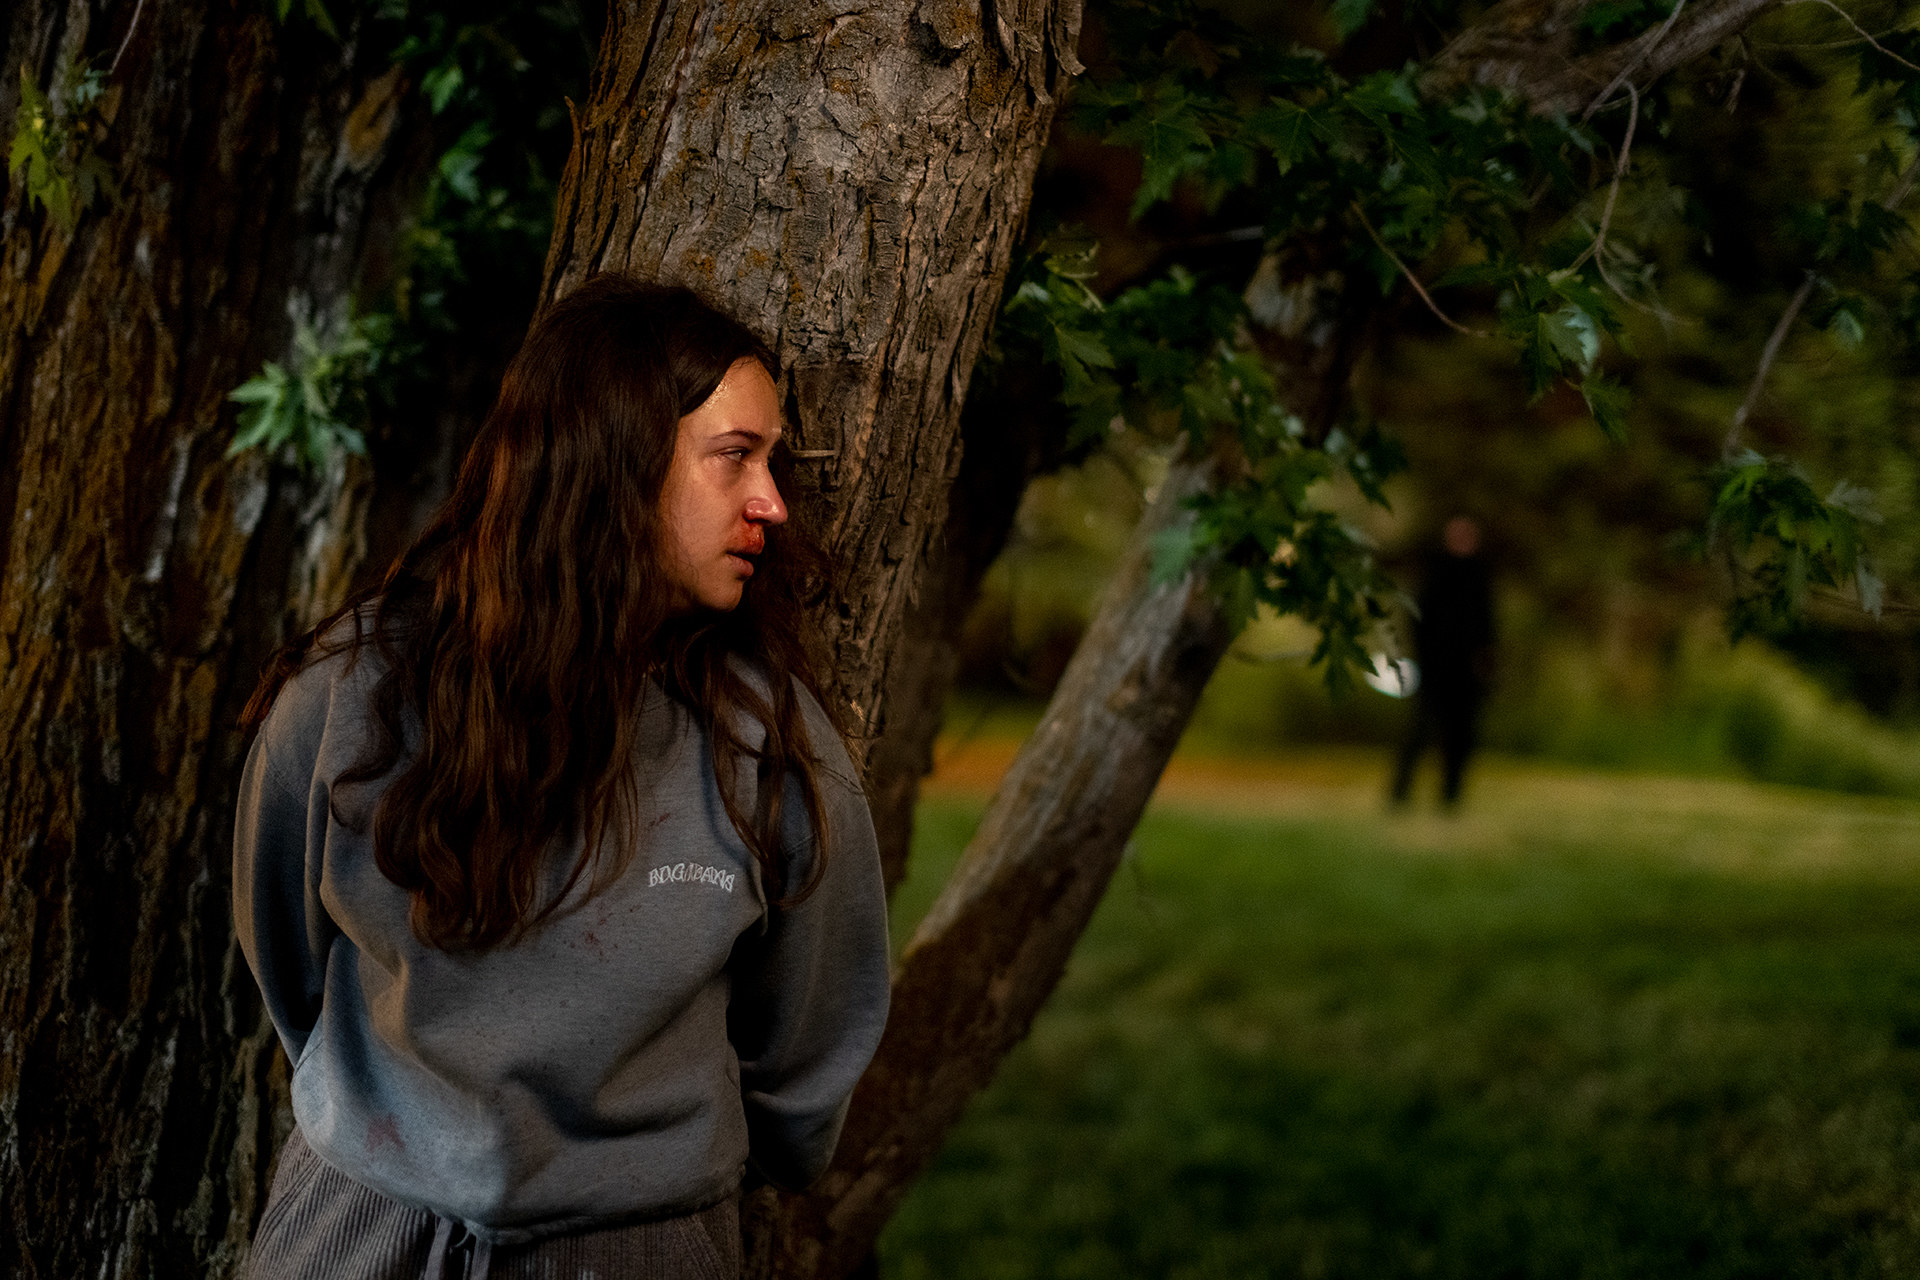 A young girl hides behind a tree while a killer stalks her